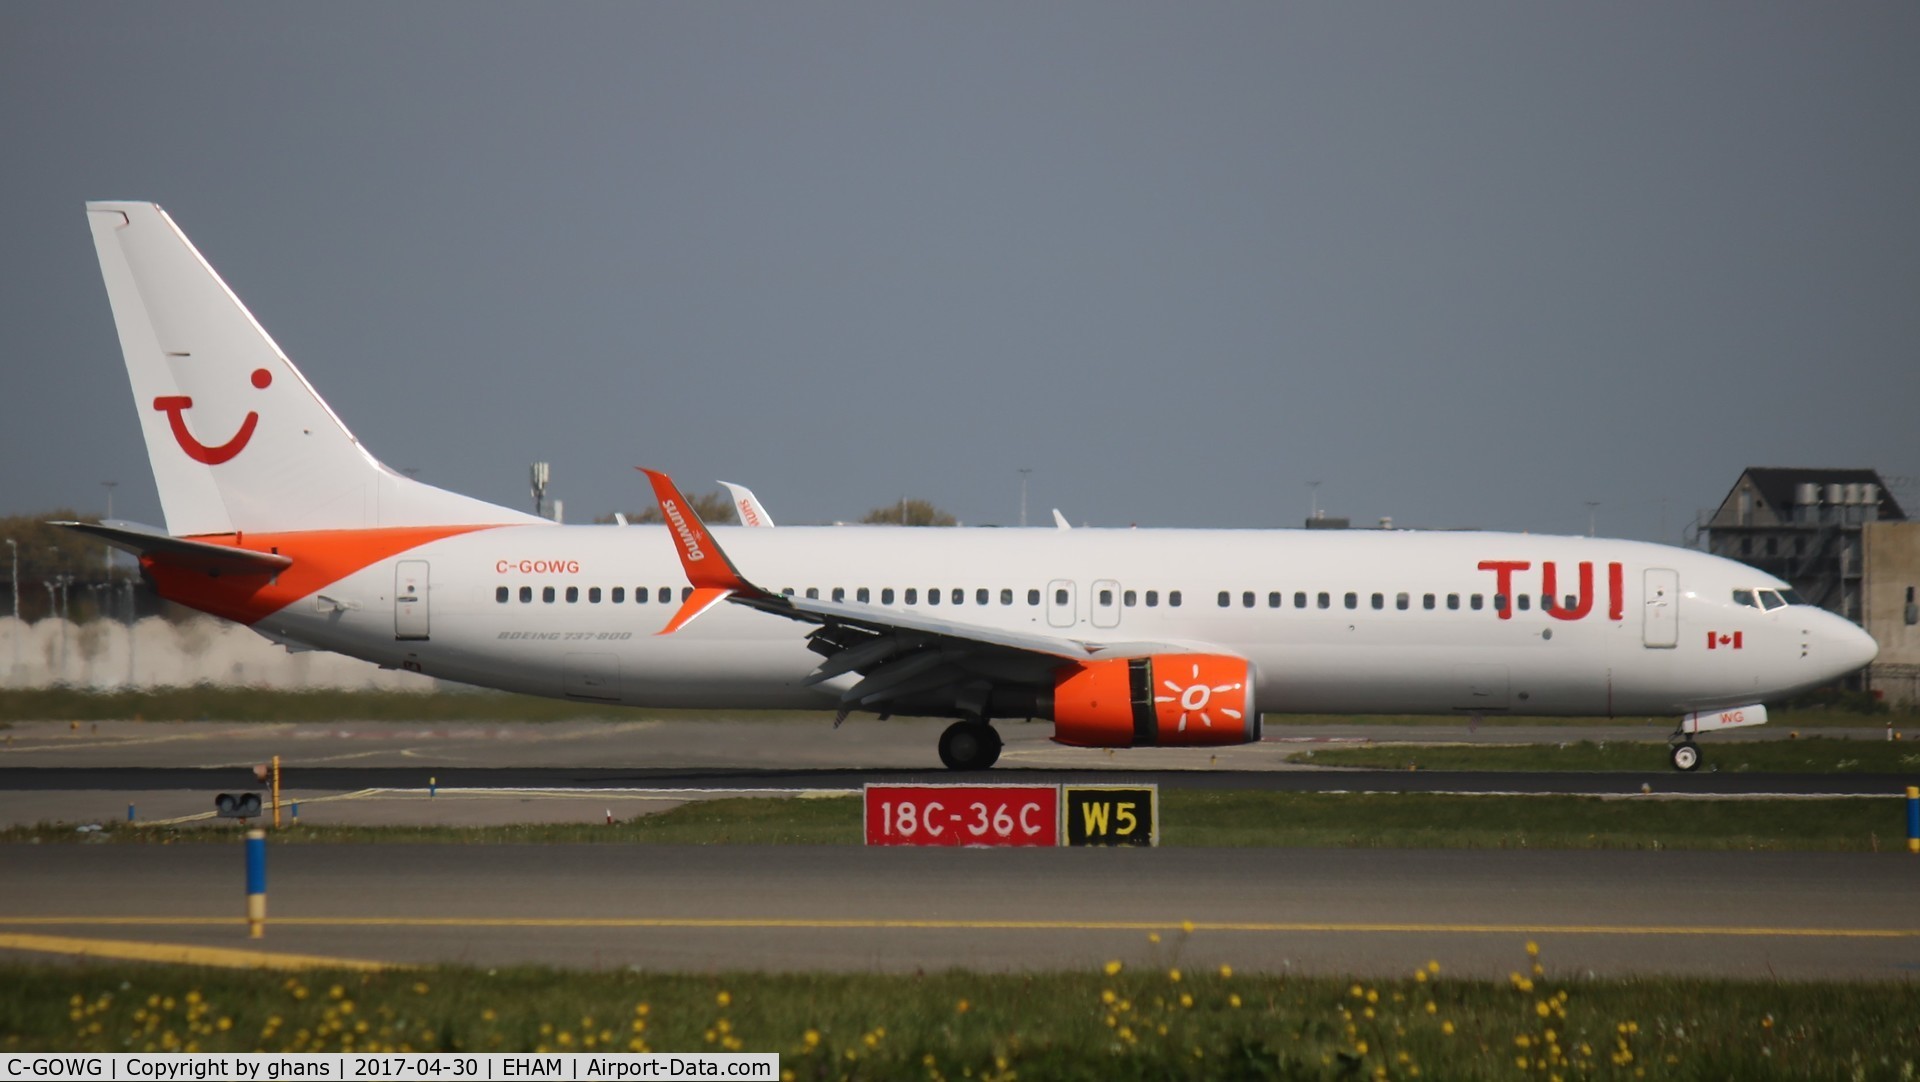 C-GOWG, 2010 Boeing 737-86J C/N 37757, Leased to Tui Airlines Netherlands